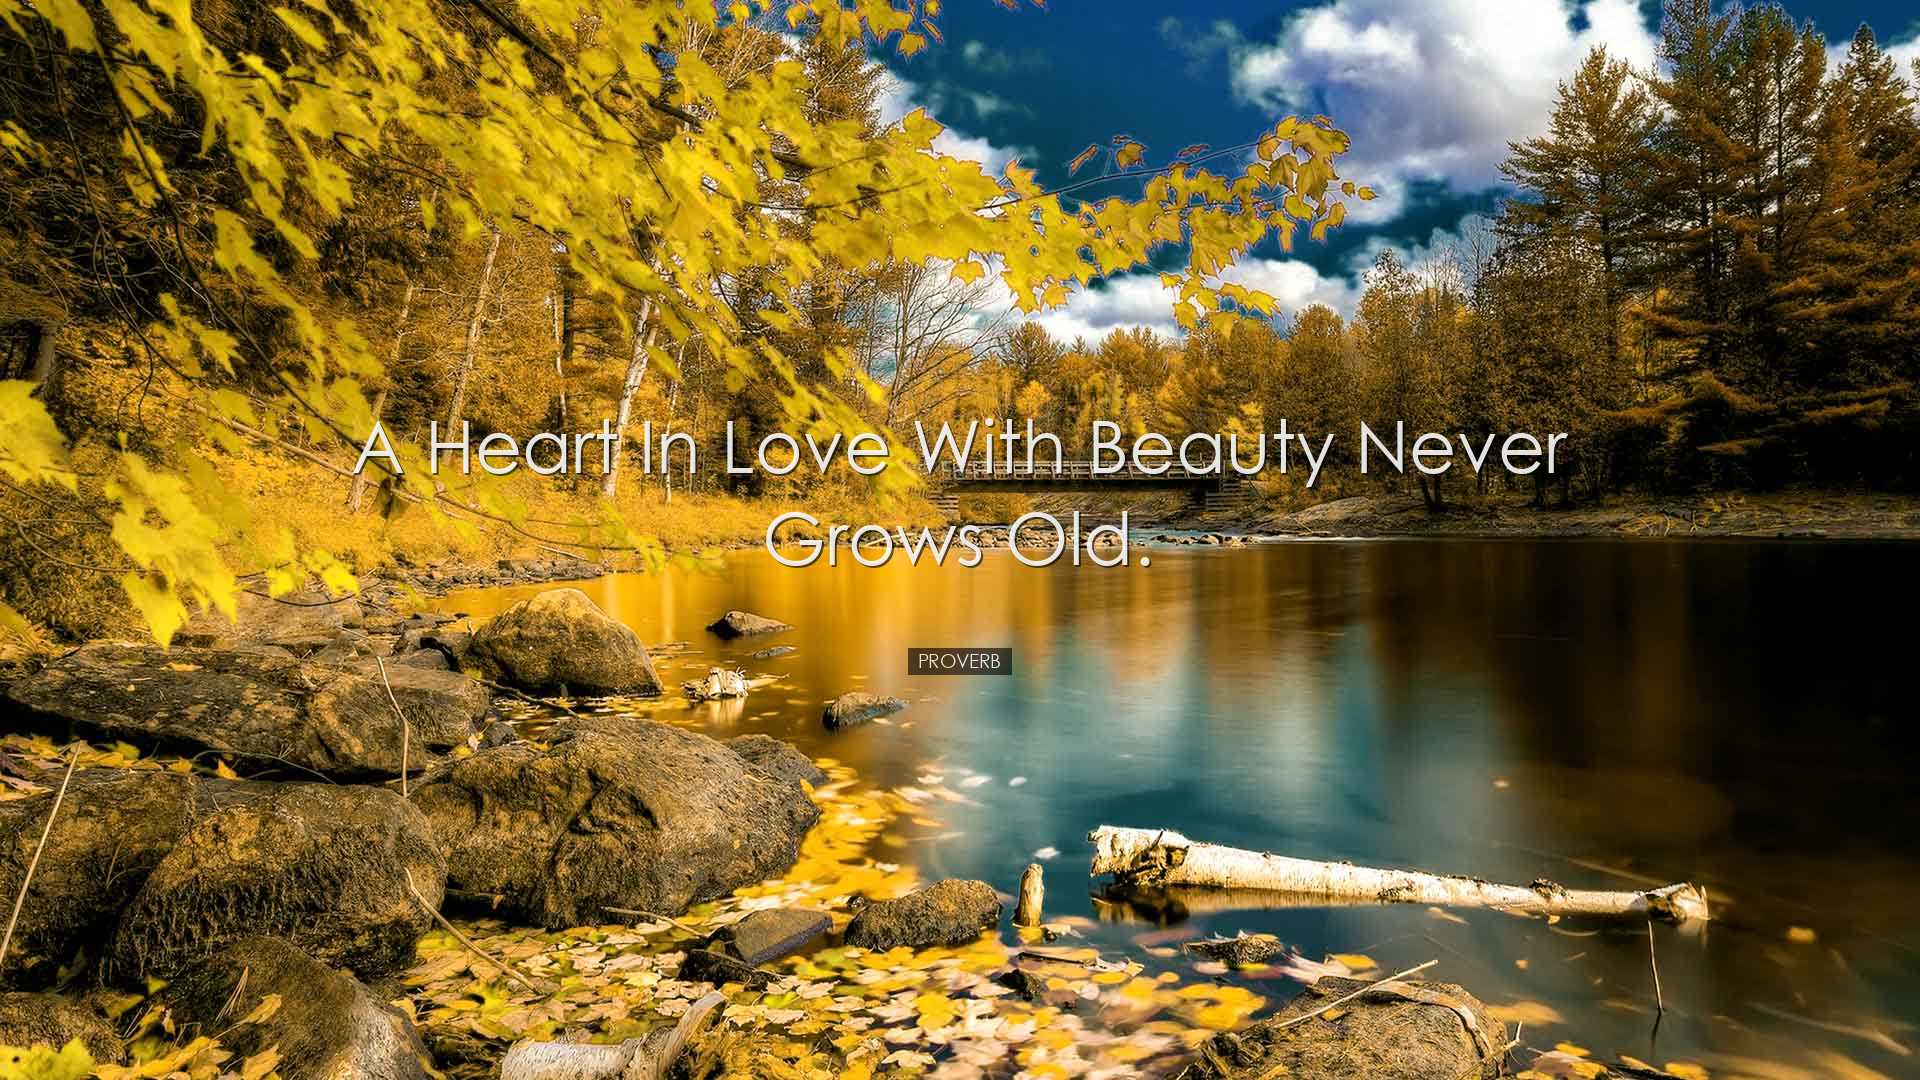 A heart in love with beauty never grows old. - Proverb